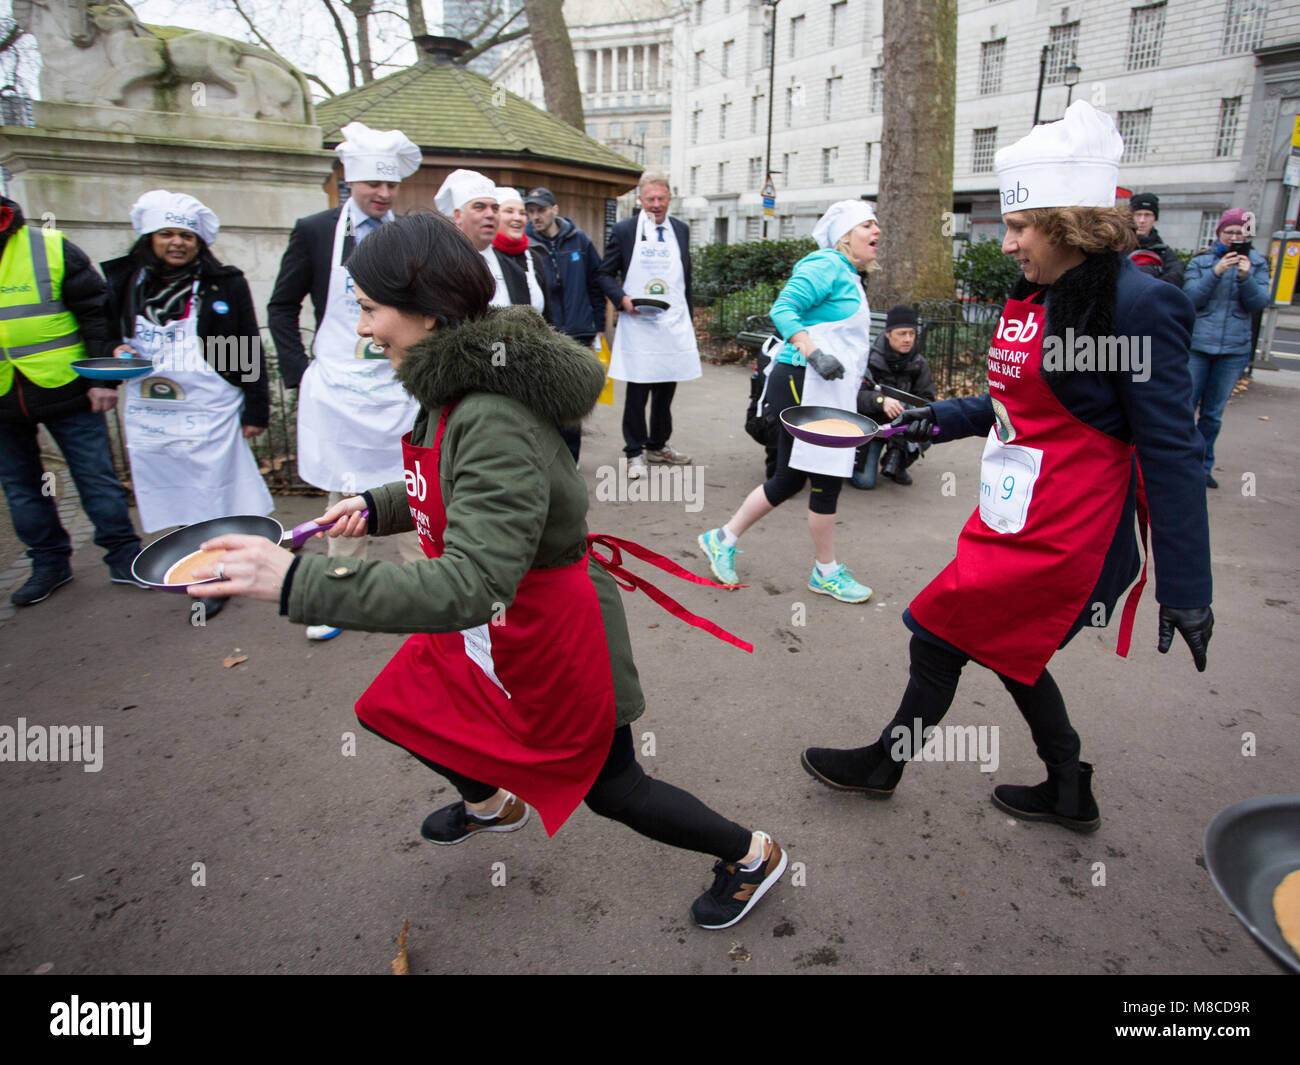 The 21st annual Rehab Parliamentary Pancake Race, supported by Lyle’s Golden Syrup, between a team of MPs and media in Victoria Tower Gardens, Millbank.  Featuring: Atmosphere, View Where: London, England, United Kingdom When: 13 Feb 2018 Credit: Wheatley/WENN Stock Photo